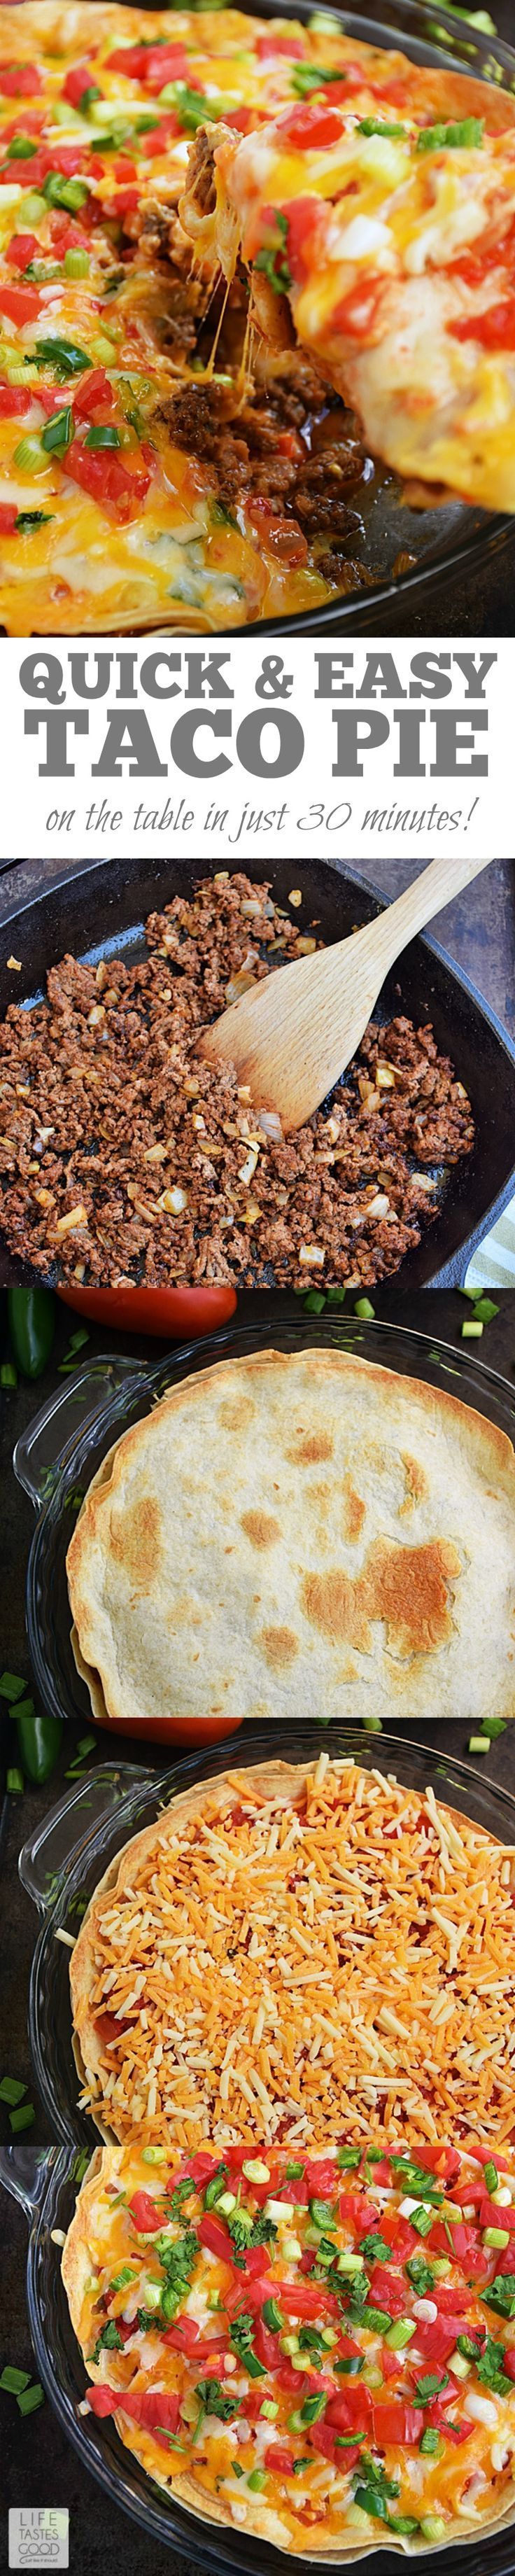 Taco Pie | by Life Tastes Good is an easy and economical recipe perfect for even the busiest nights of the week! Refried beans and